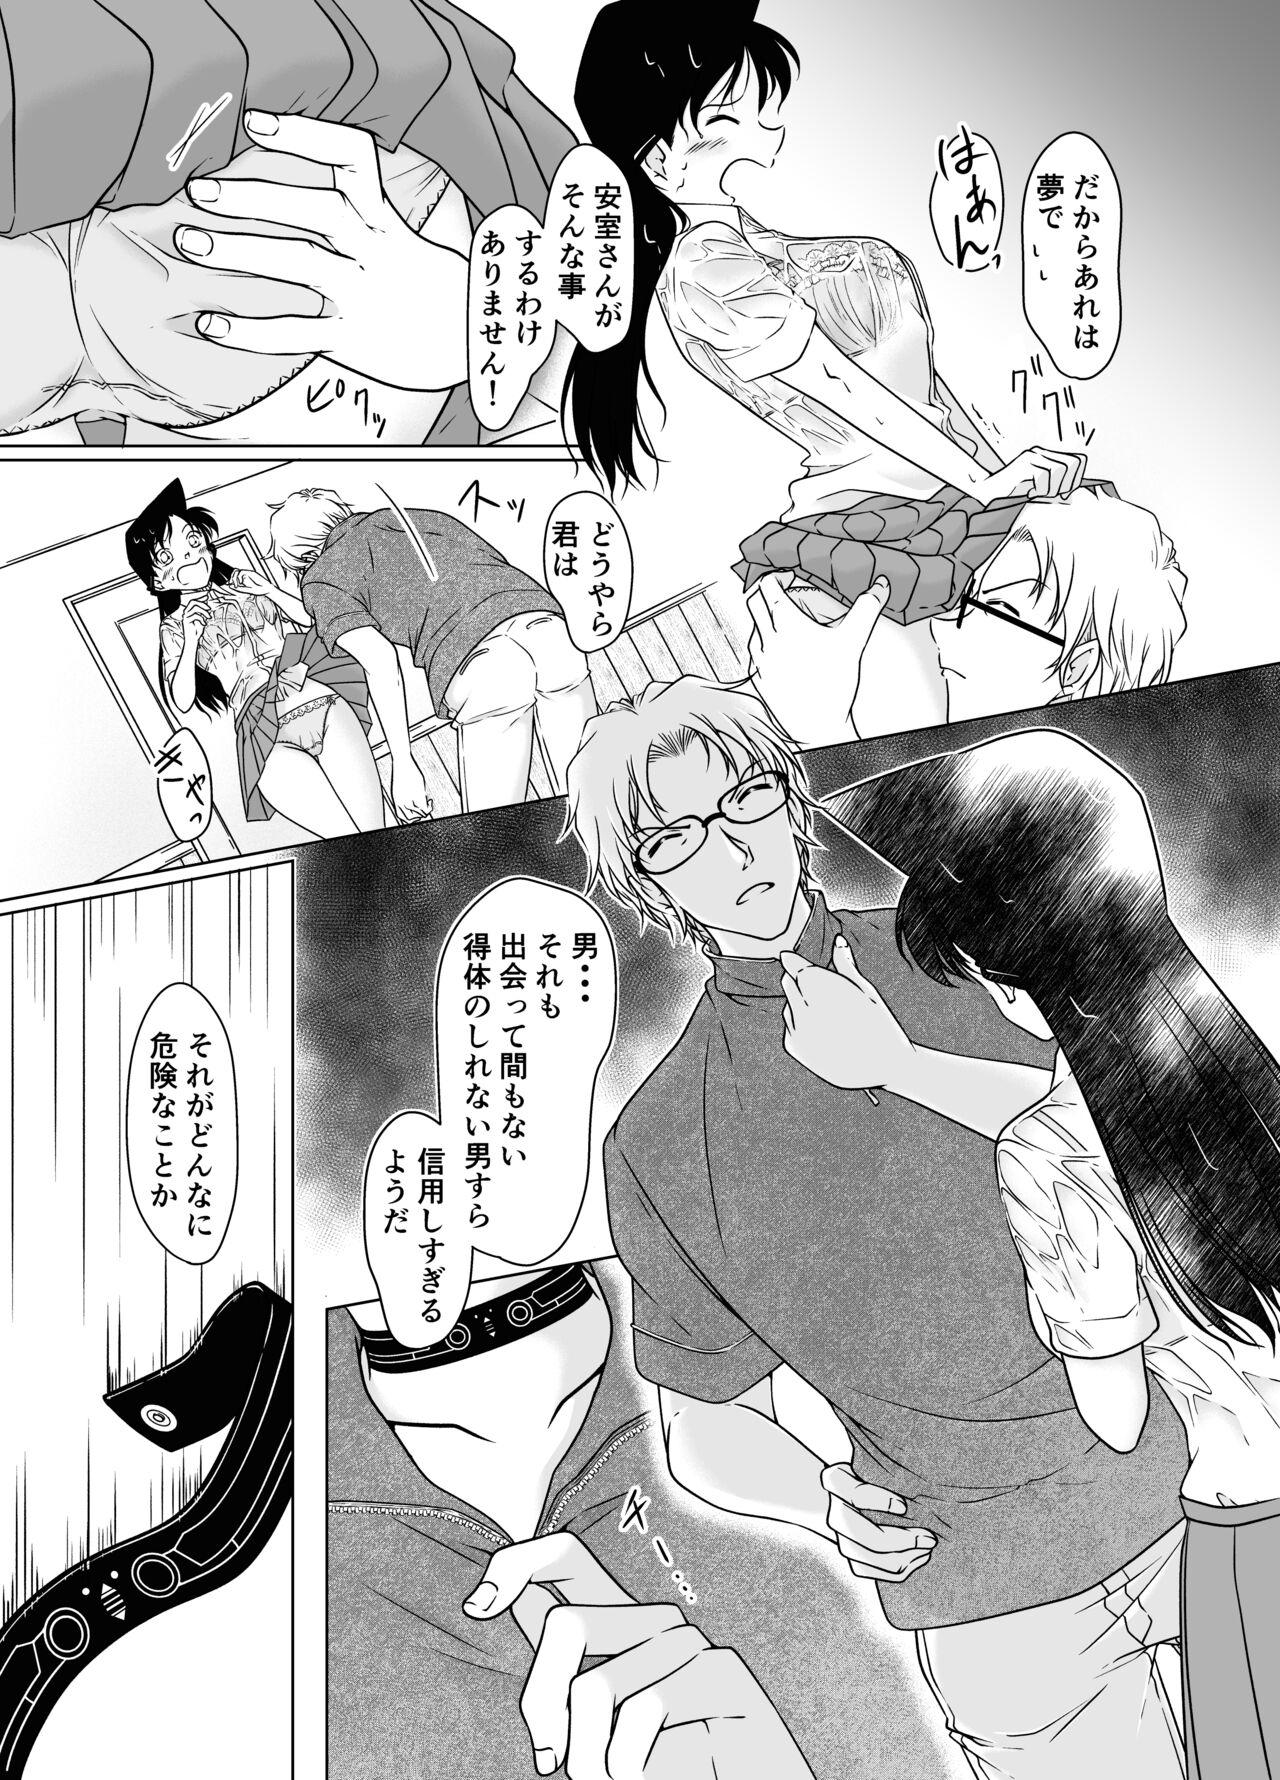 Fat Ass 【Detective Conan】Something is wrong in the afternoon - Detective conan | meitantei conan Longhair - Page 10